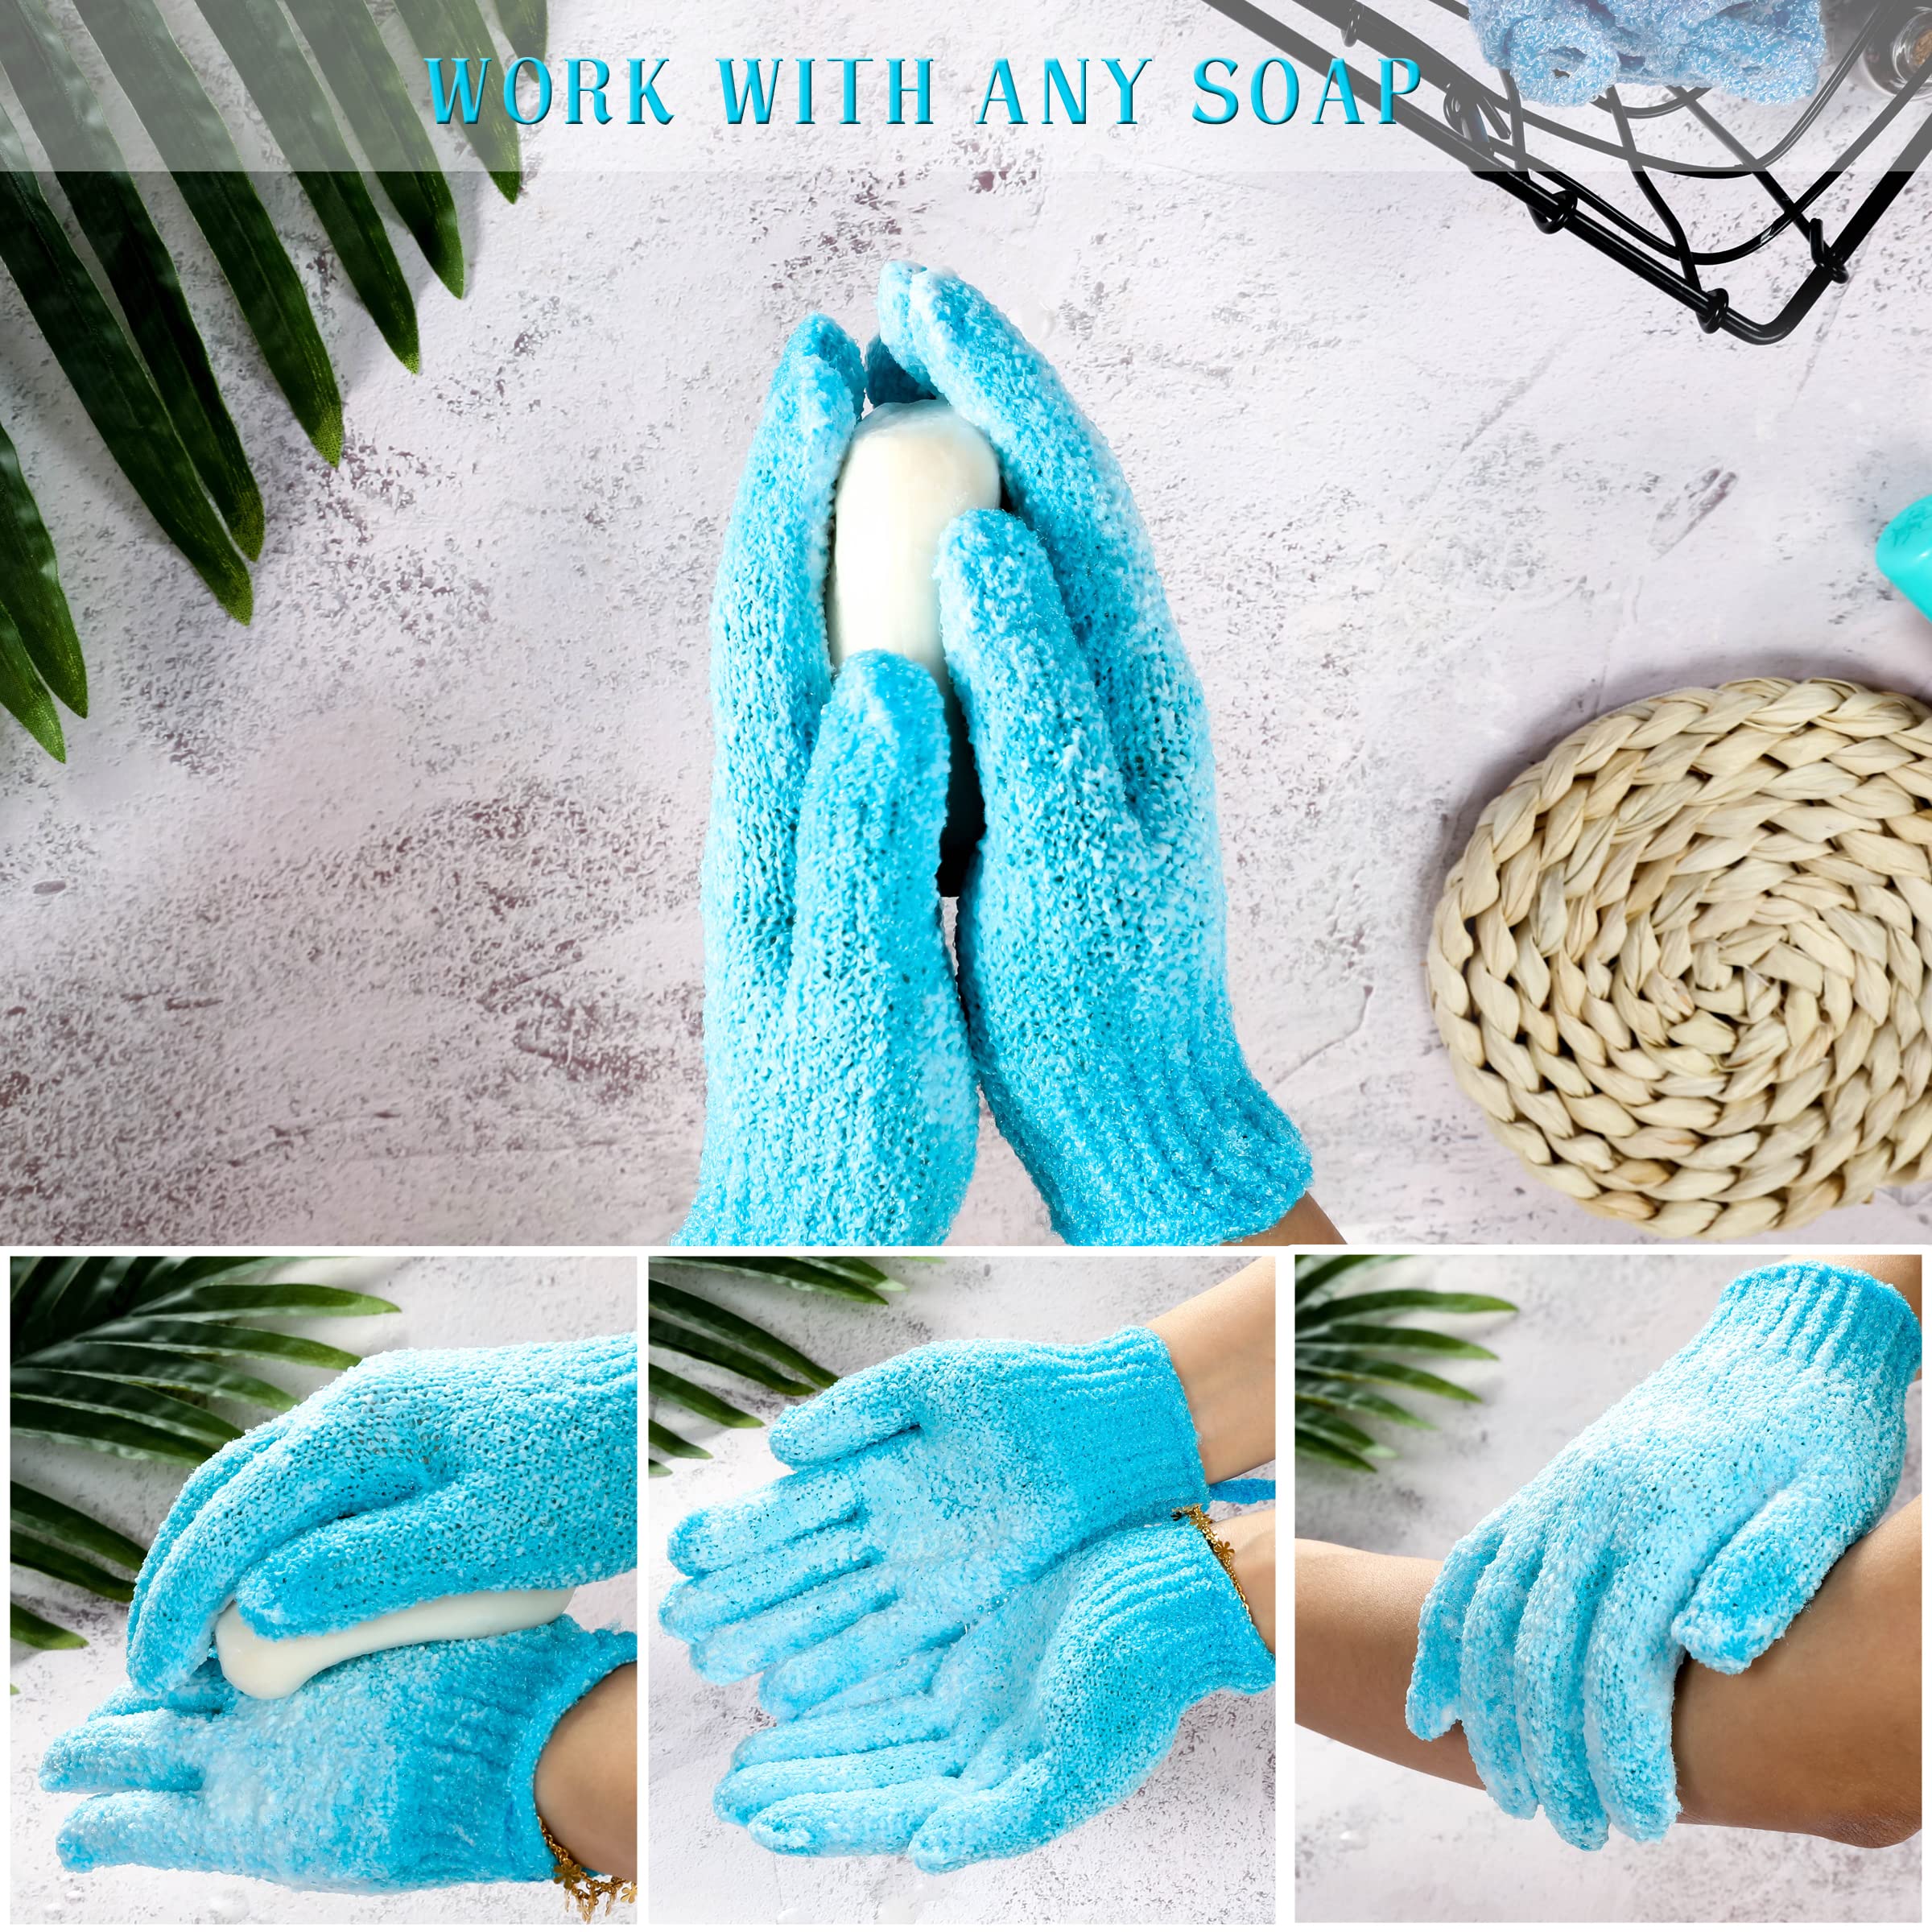 Shower Gloves,24 Pcs Exfoliating Bath Gloves,Body Scrub Gloves with Hanging Loop for Beauty Spa Massage Skin Shower Body Scrubber-12 Colors